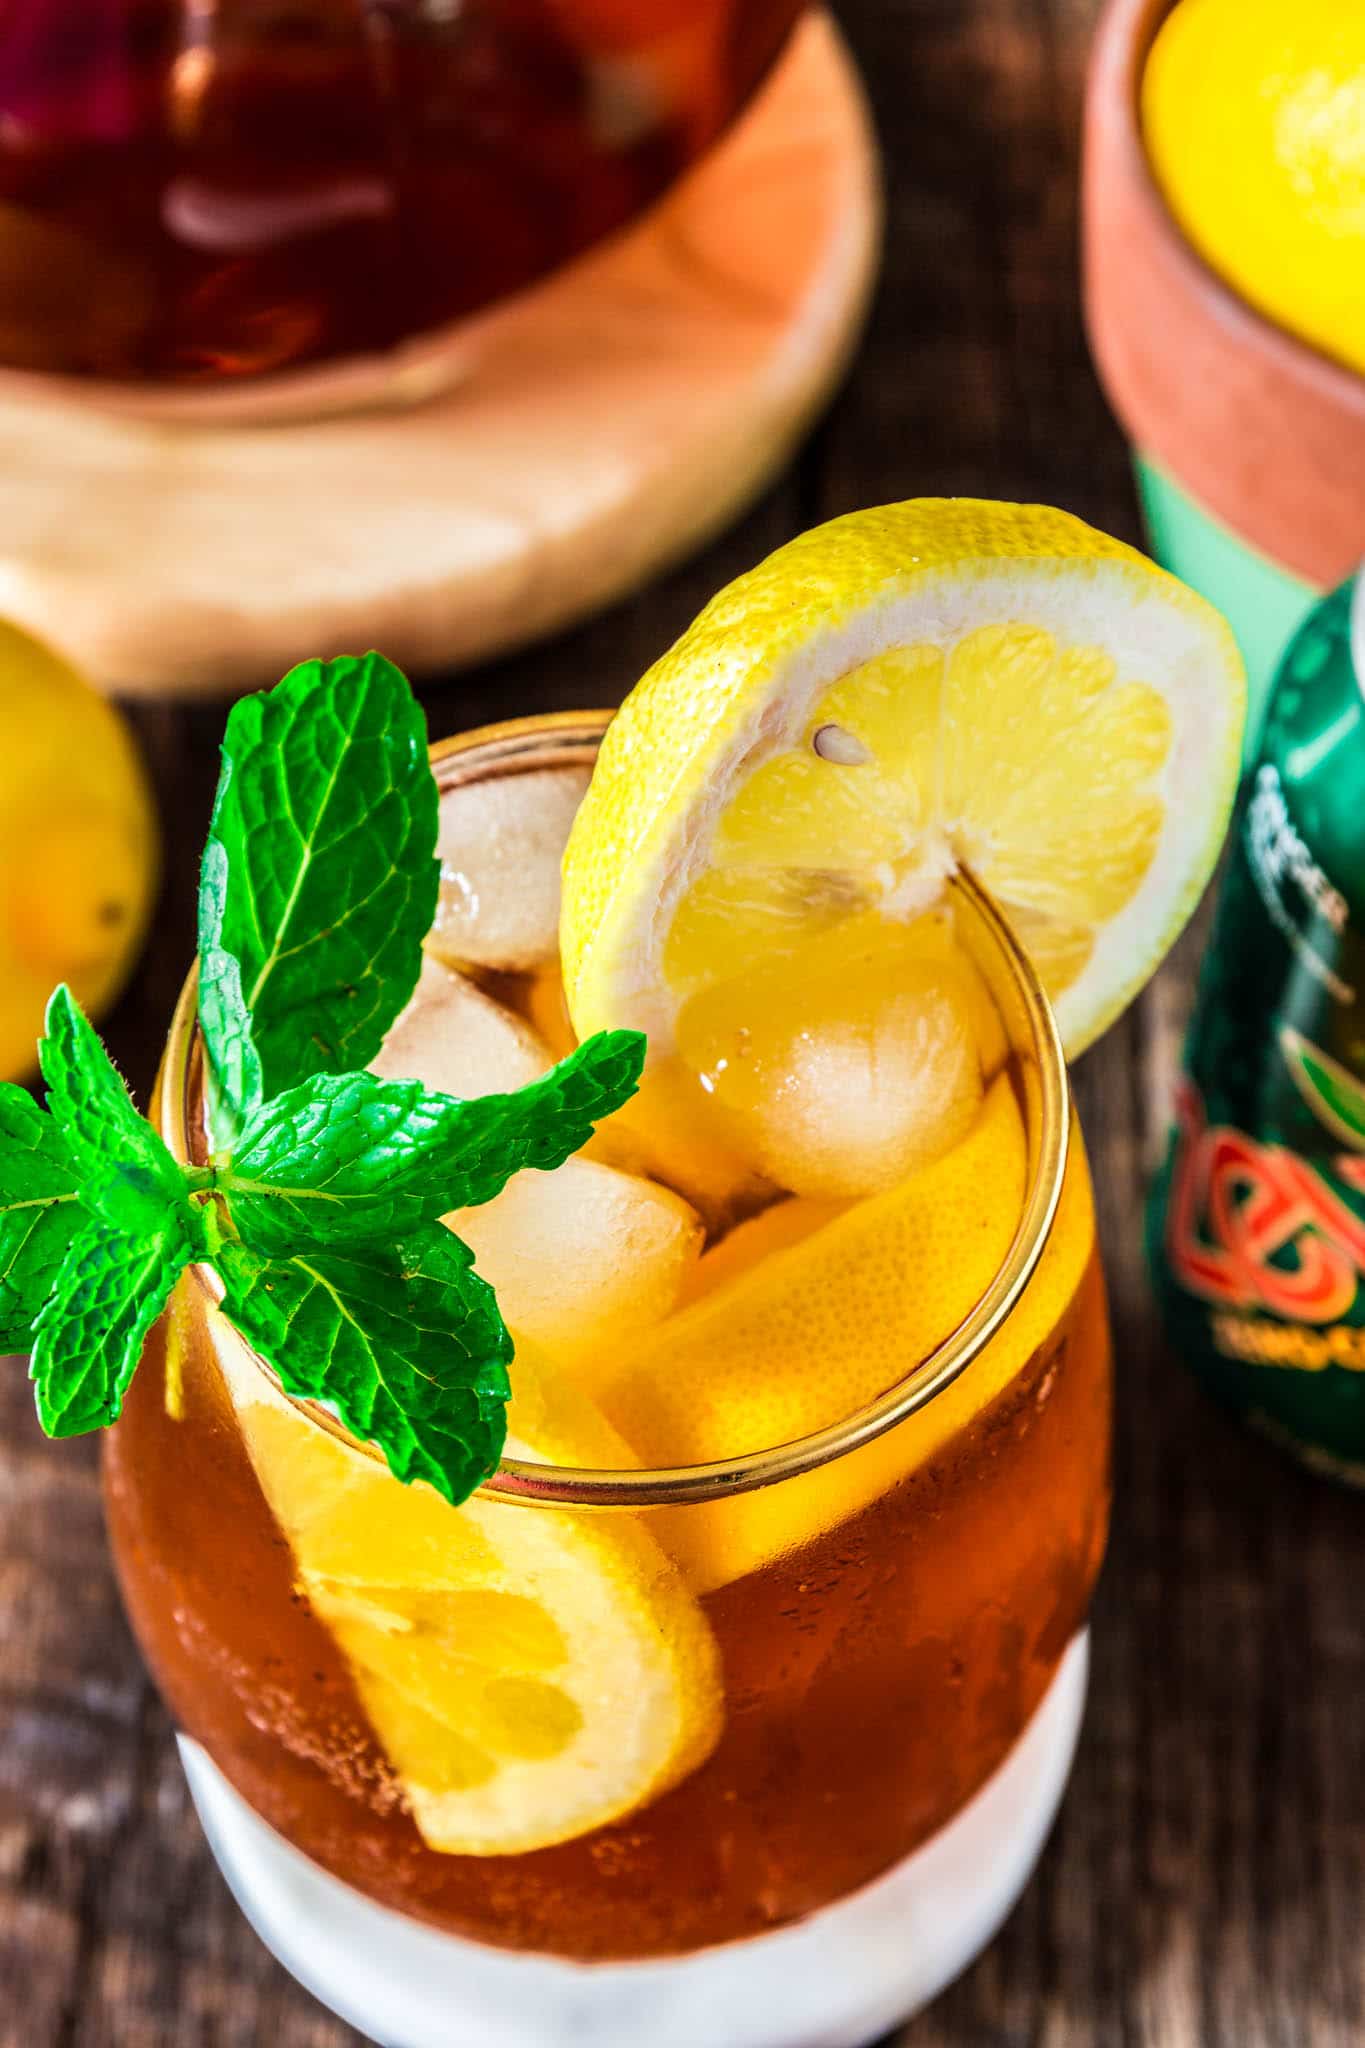 Iced Tea Punch | www.oliviascuisine.com | Refreshing and fizzy, this Iced Tea Punch is exactly what you need on a hot summer day! And the best part? It is sugar free. Meaning you can drink as much as you want without an ounce of guilt! (Recipe by @oliviascuisine.)